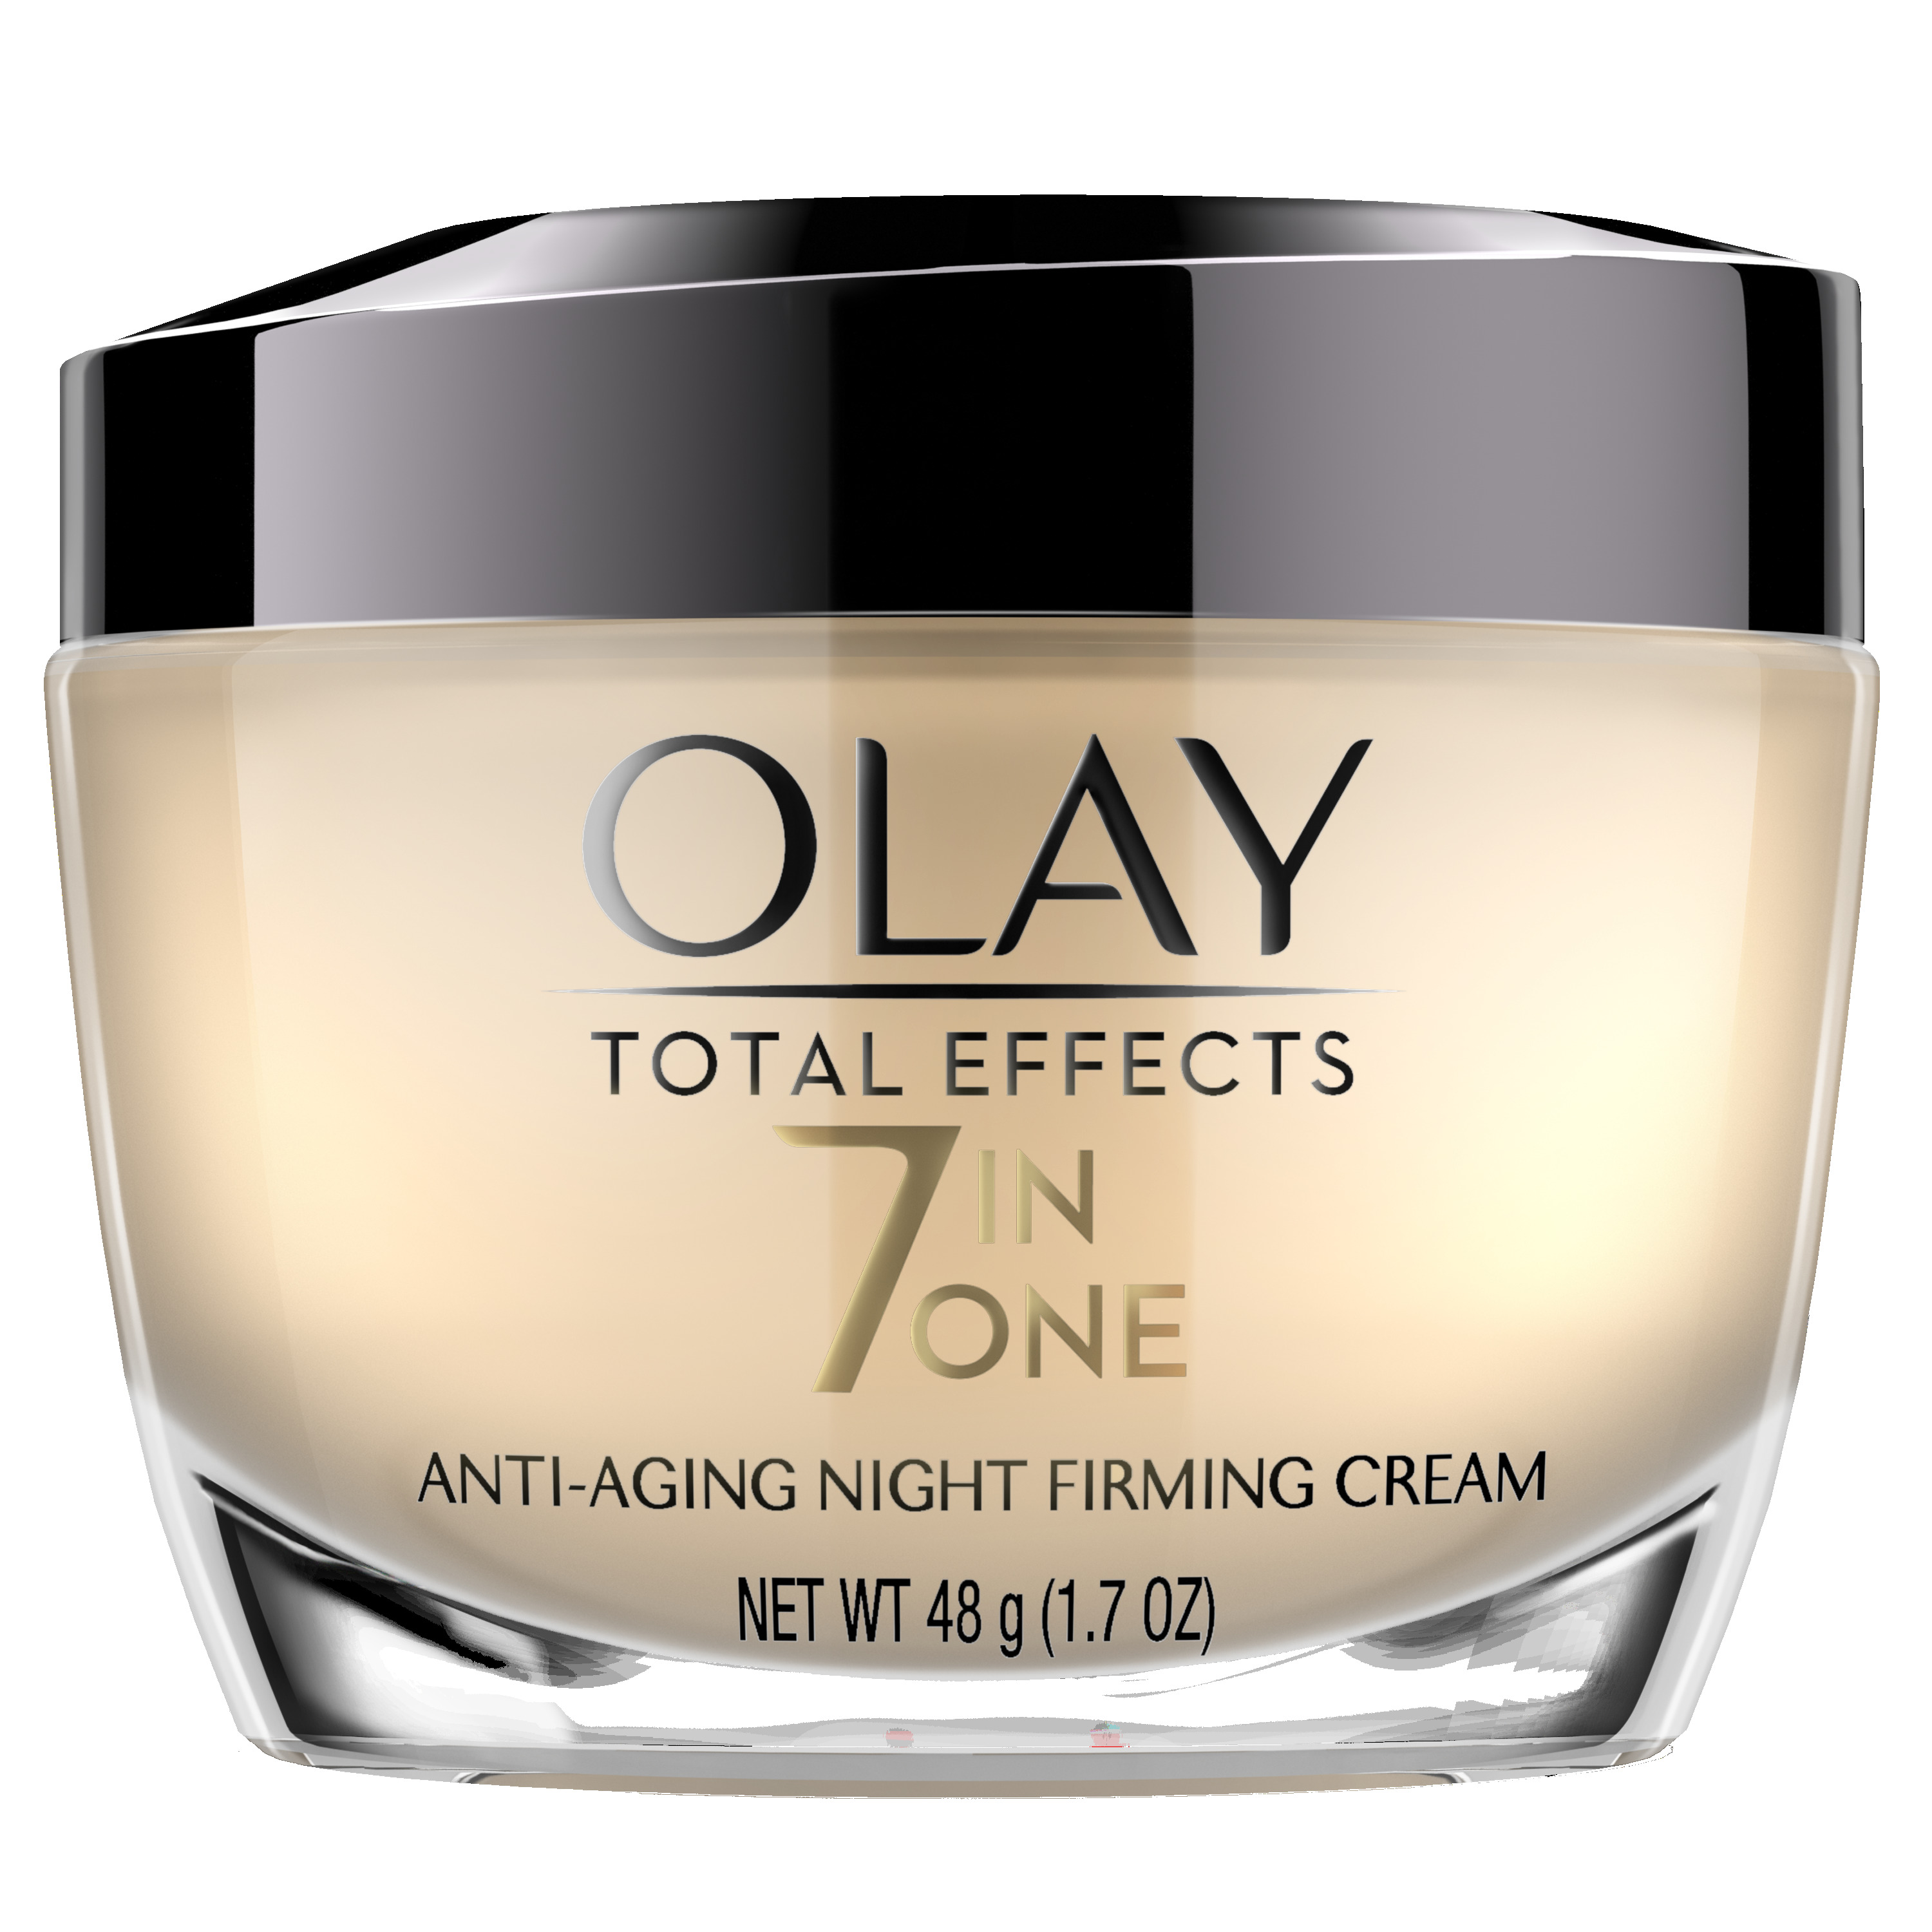 Olay Total Effects 7-In-1 Anti-Aging Firming Night Cream ingredients